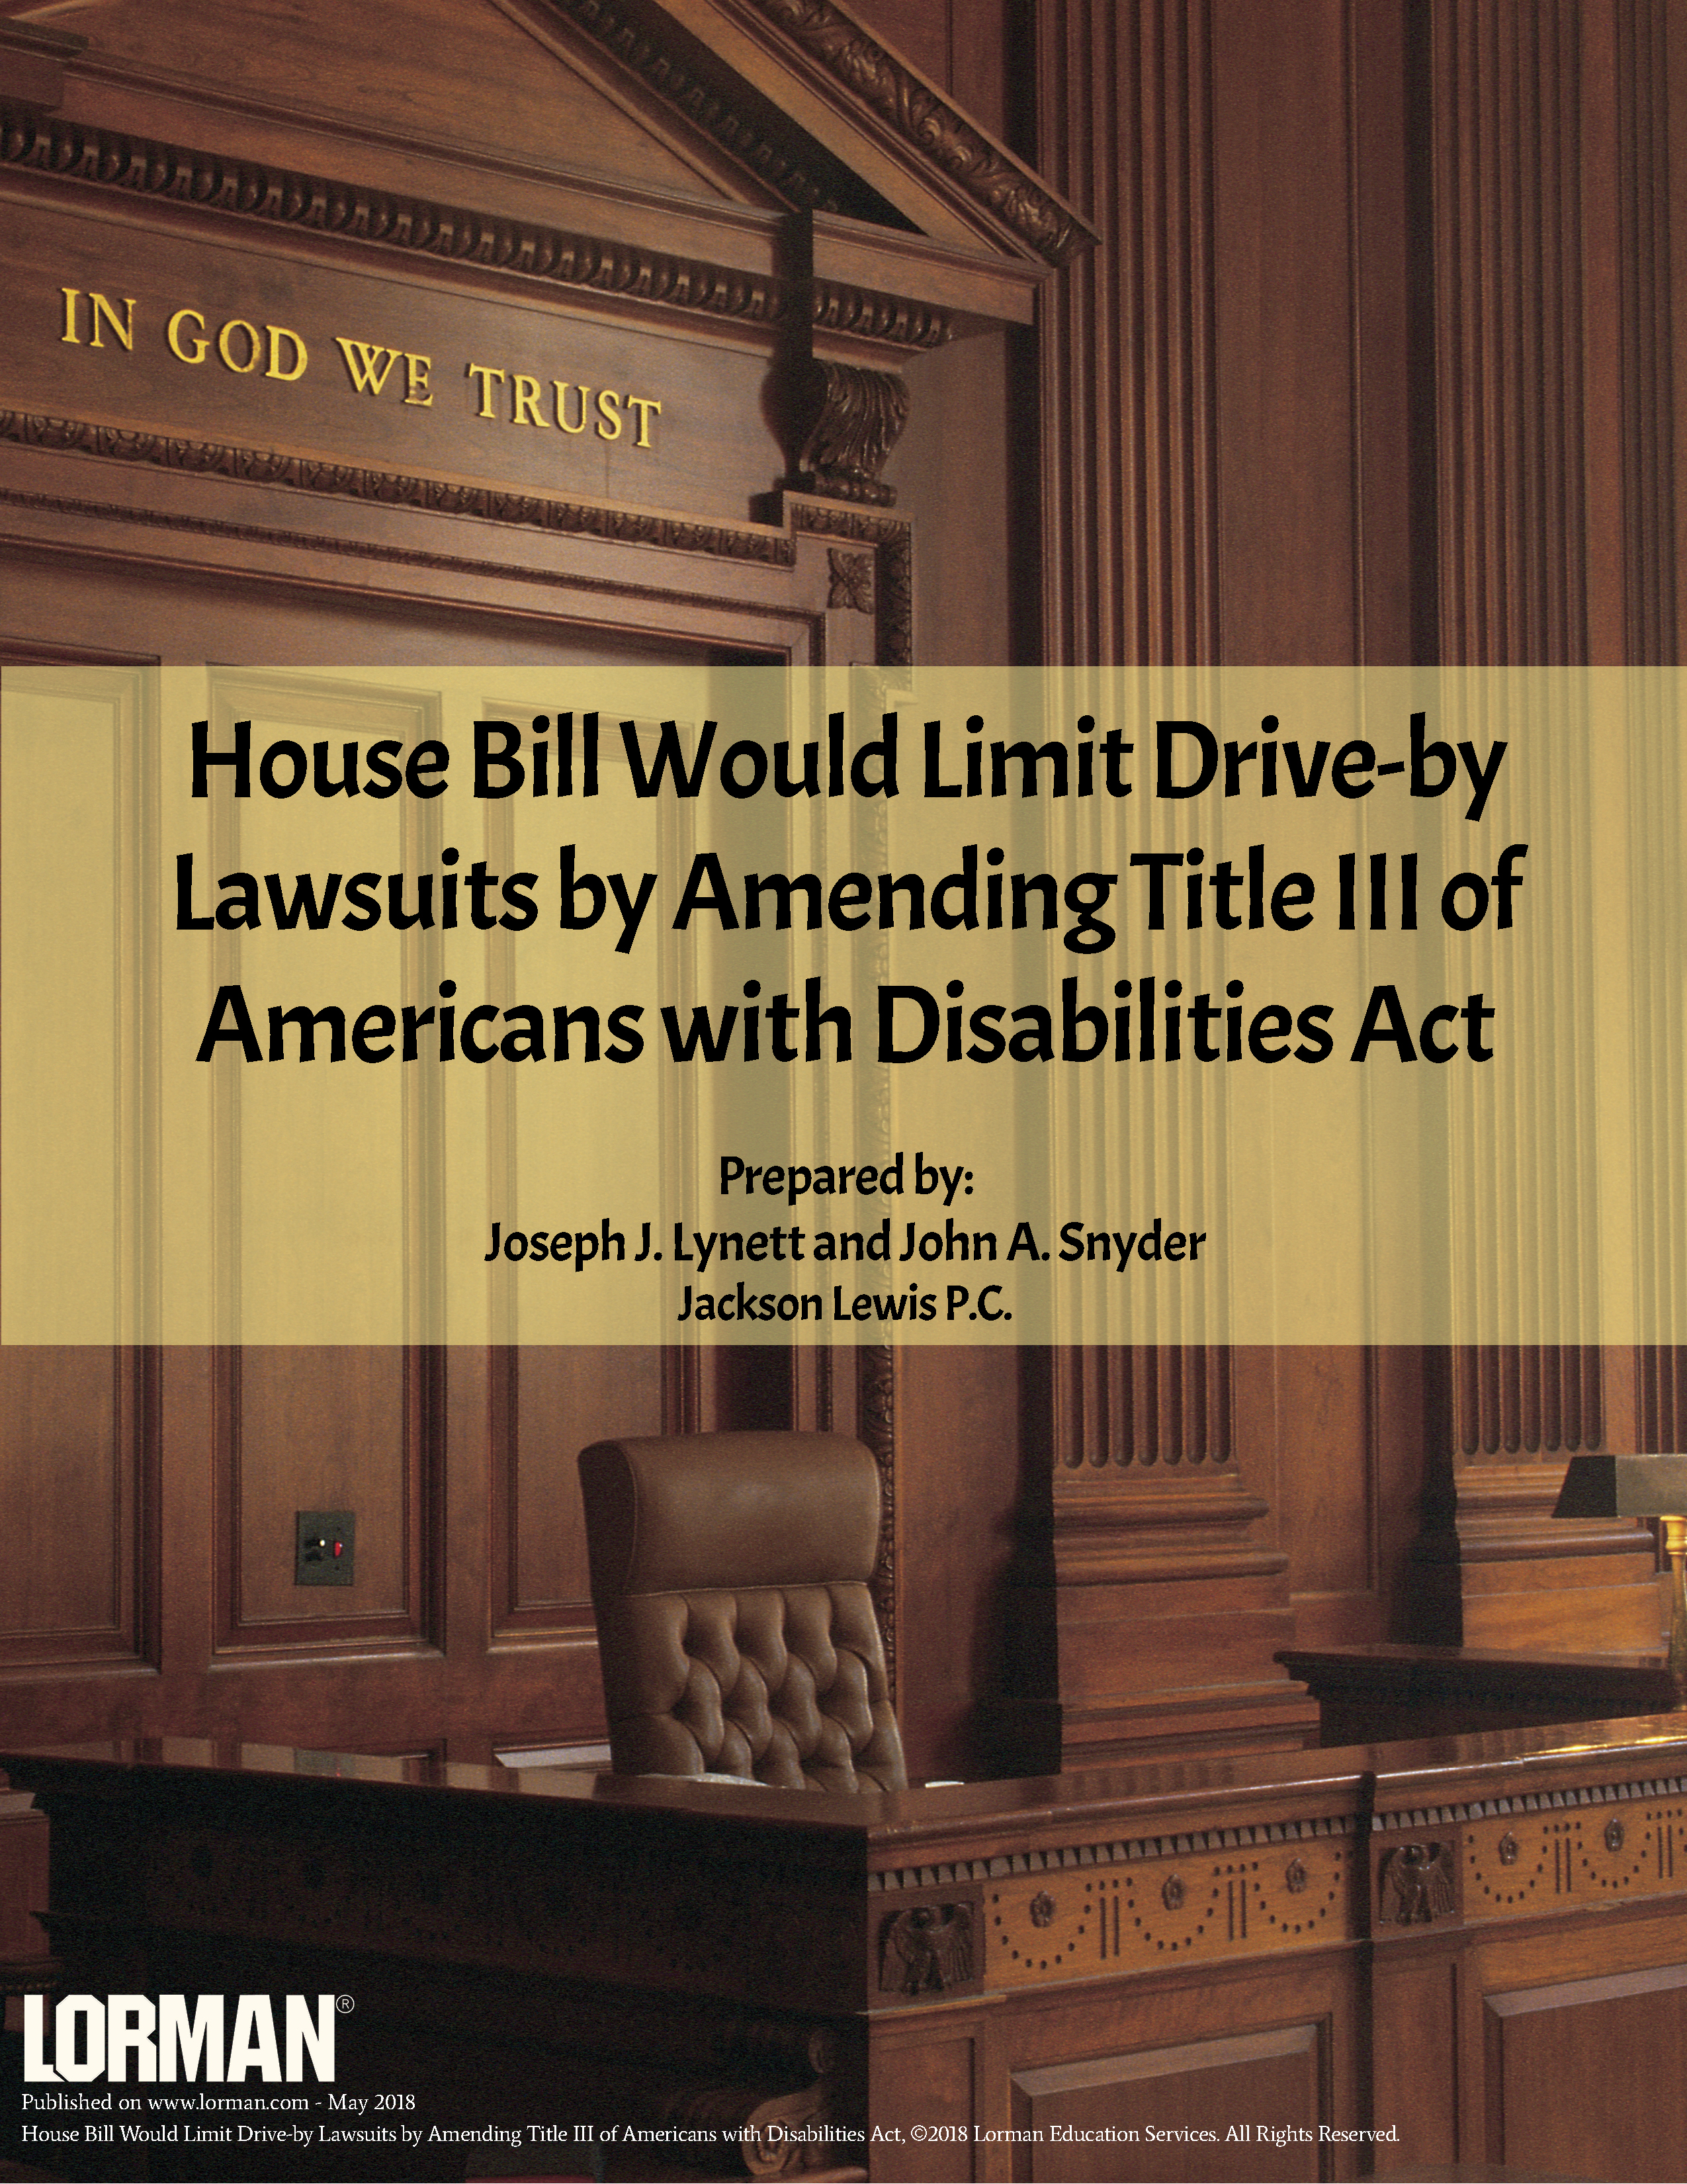 House Bill Would Limit Drive-by Lawsuits by Amending Title III of Americans with Disabilities Act